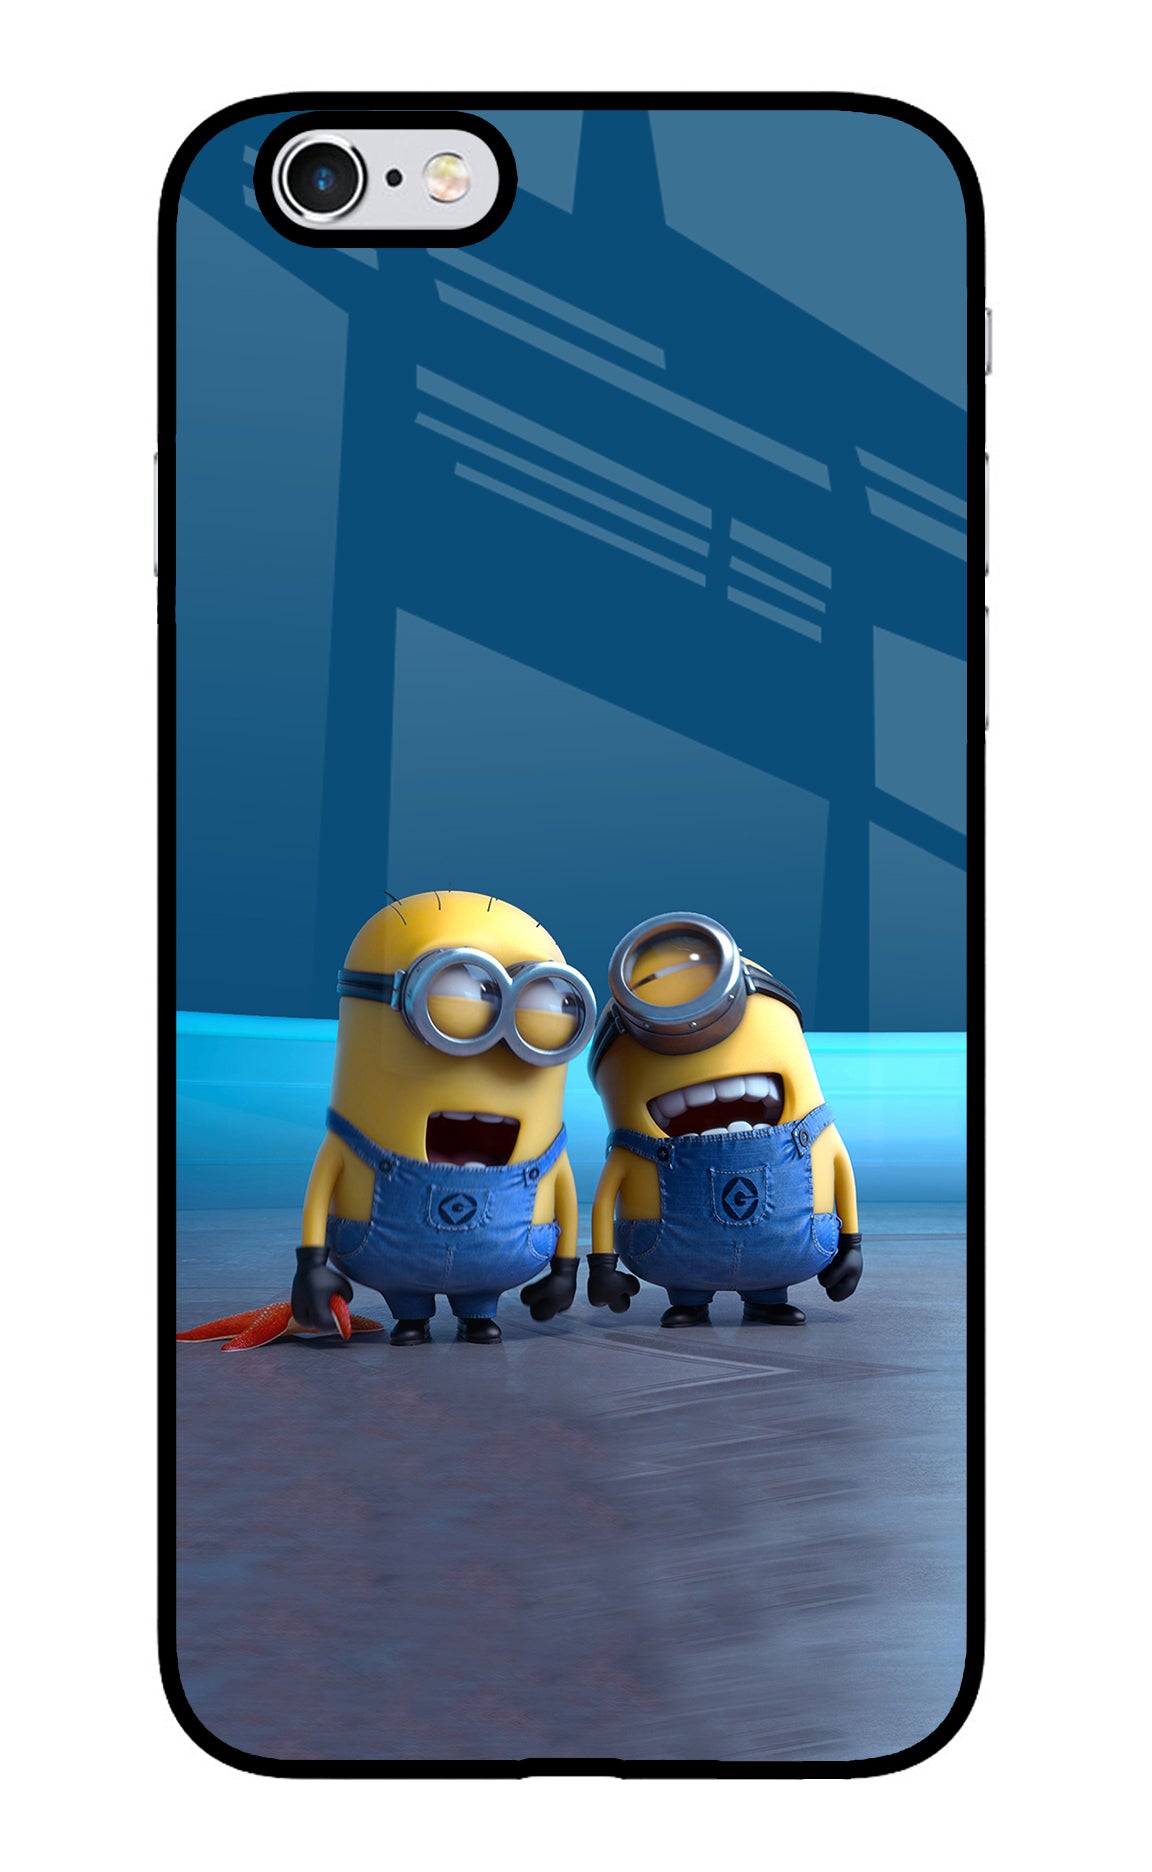 Minion Laughing iPhone 6/6s Glass Case